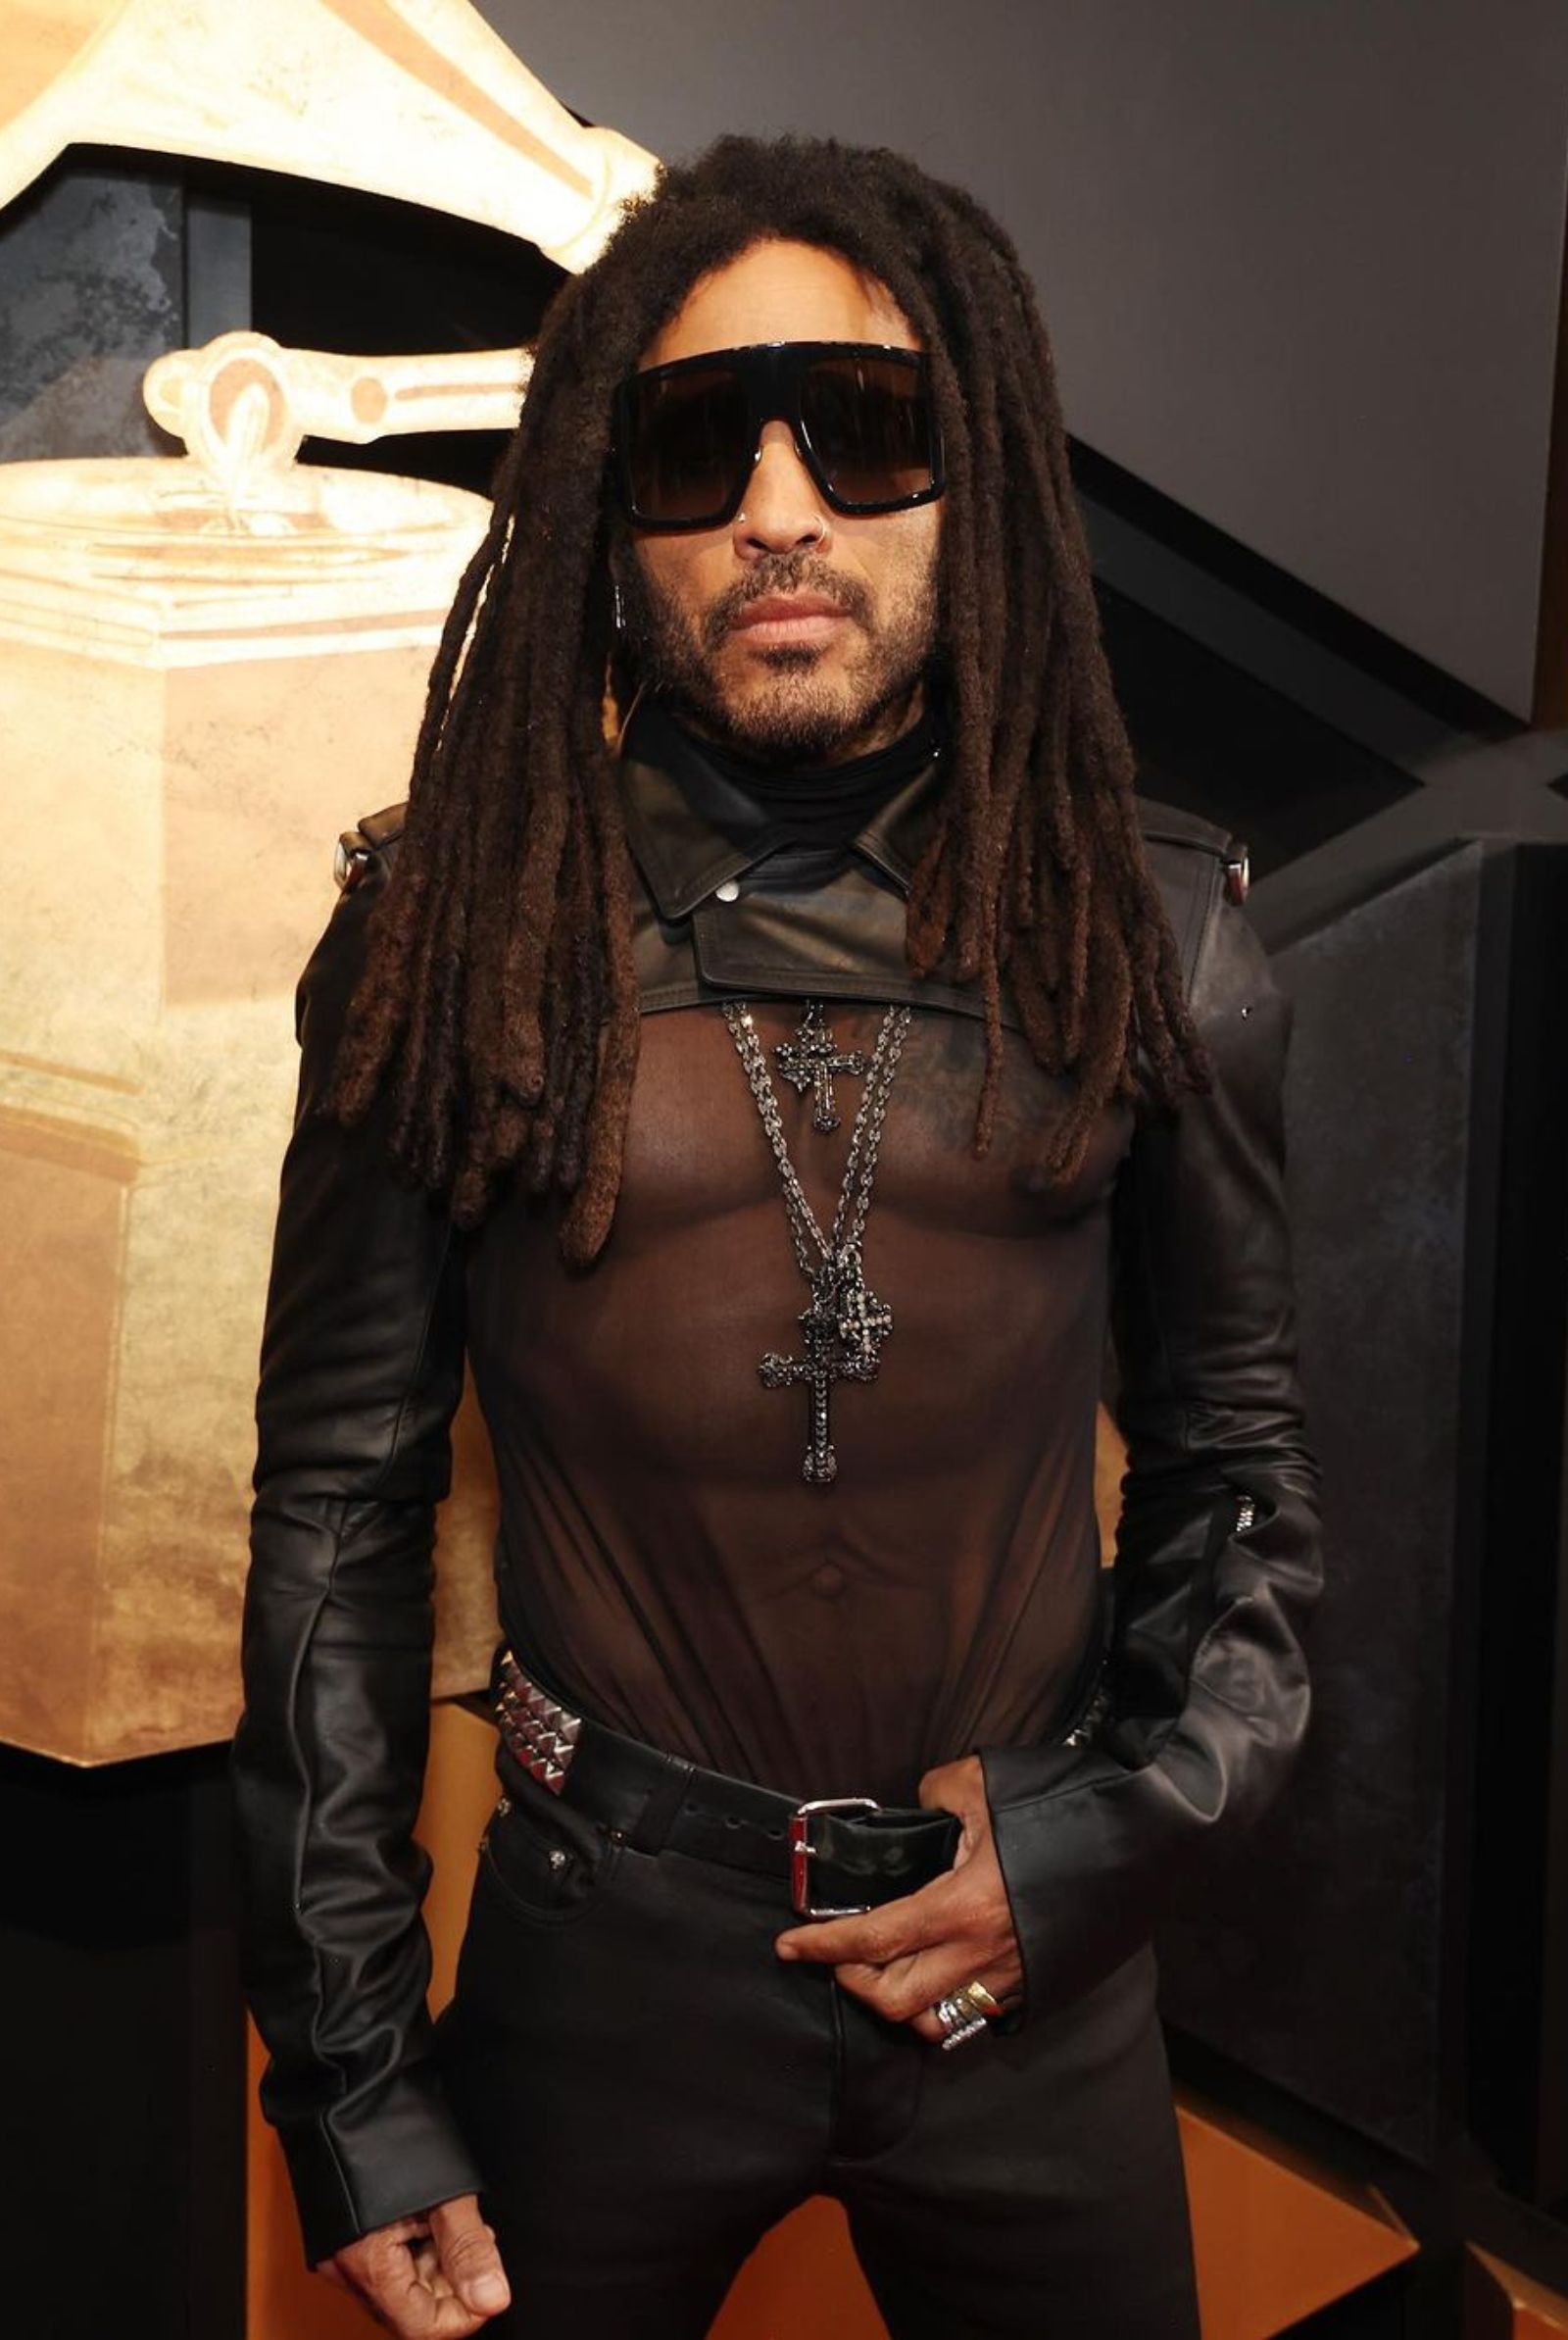 Lenny Kravitz takes center stage at the Grammys with a daring black outfit